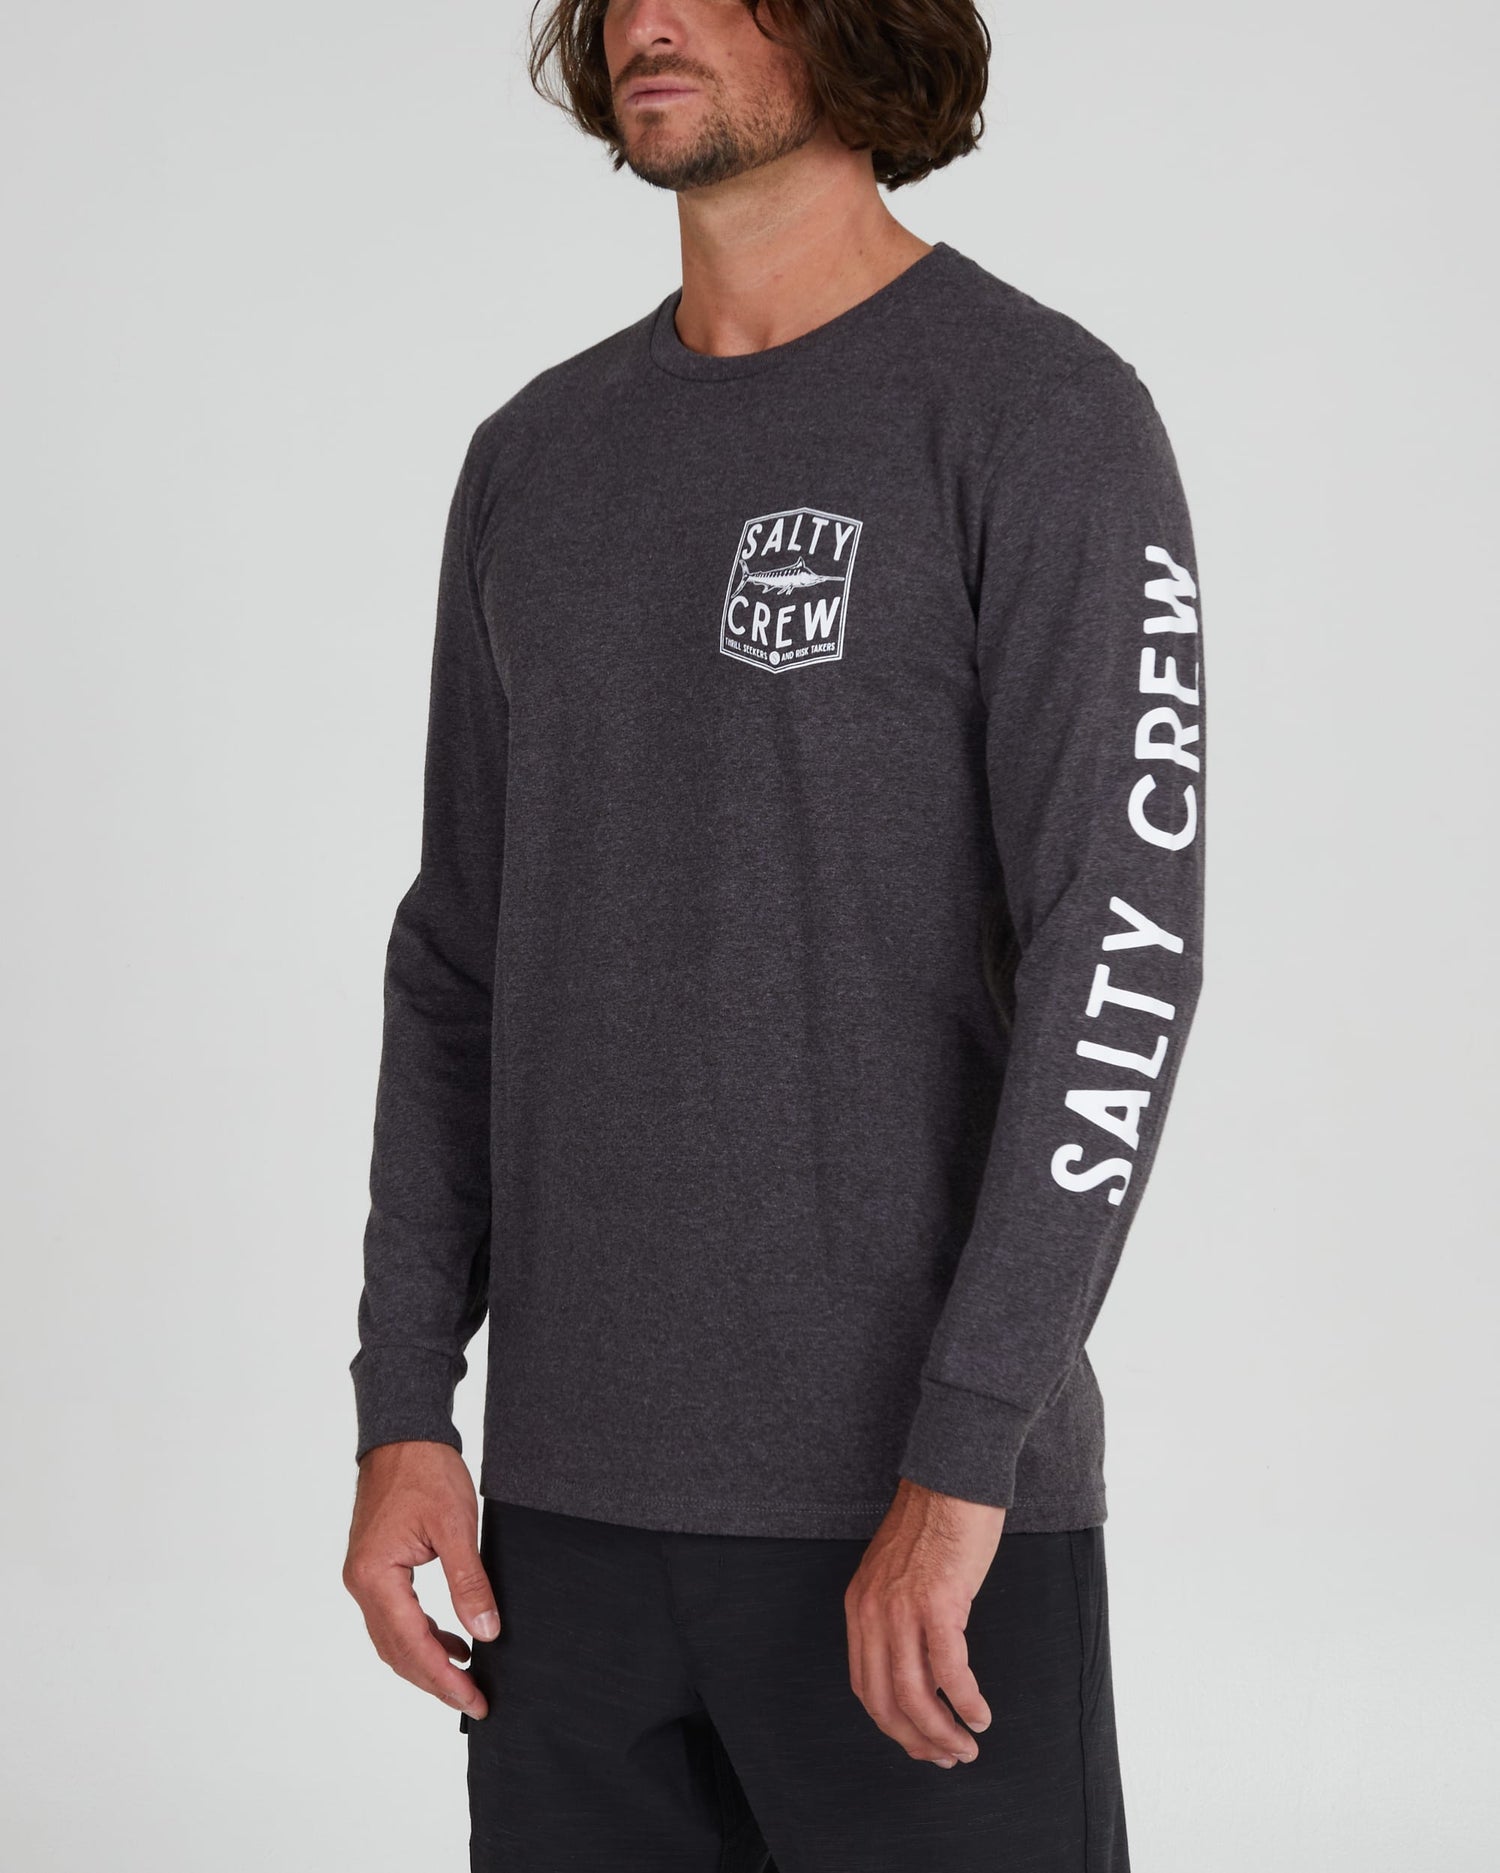 Salty crew T-SHIRTS L/S FISHERY STANDARD L/S TEE - Charcoal Heather in Charcoal Heather